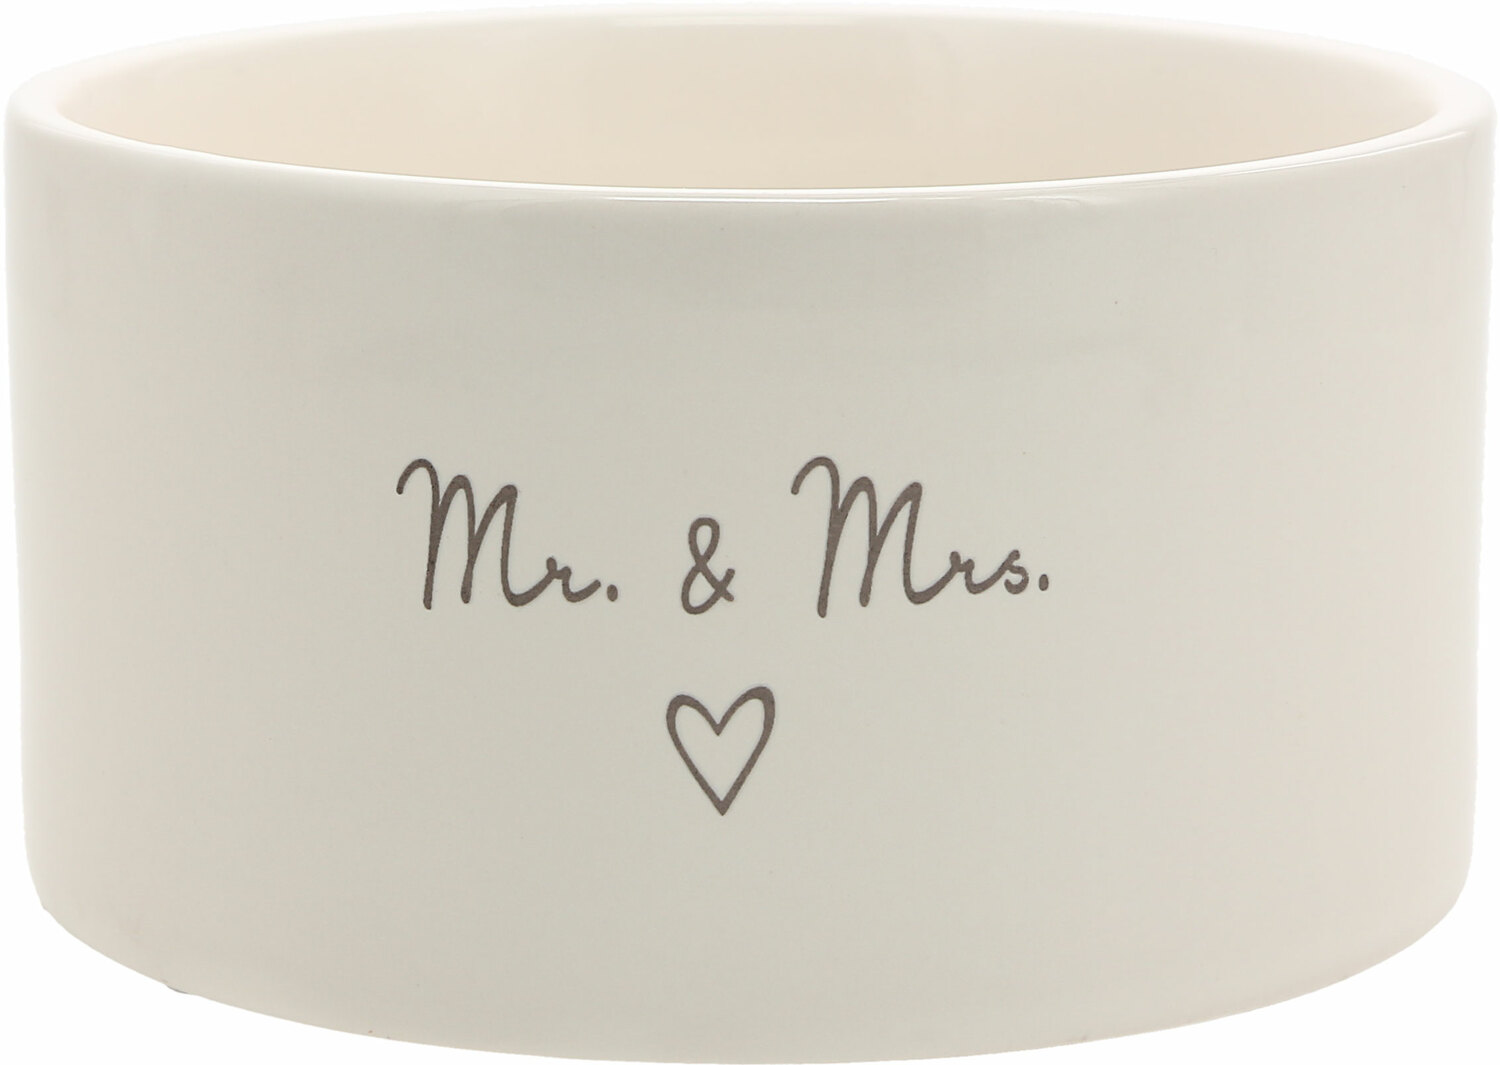 Mr. & Mrs. by Comfort Collection - Mr. & Mrs. - Double Wick 10 oz 100% Soy Wax Candle
Scent: Tranquility